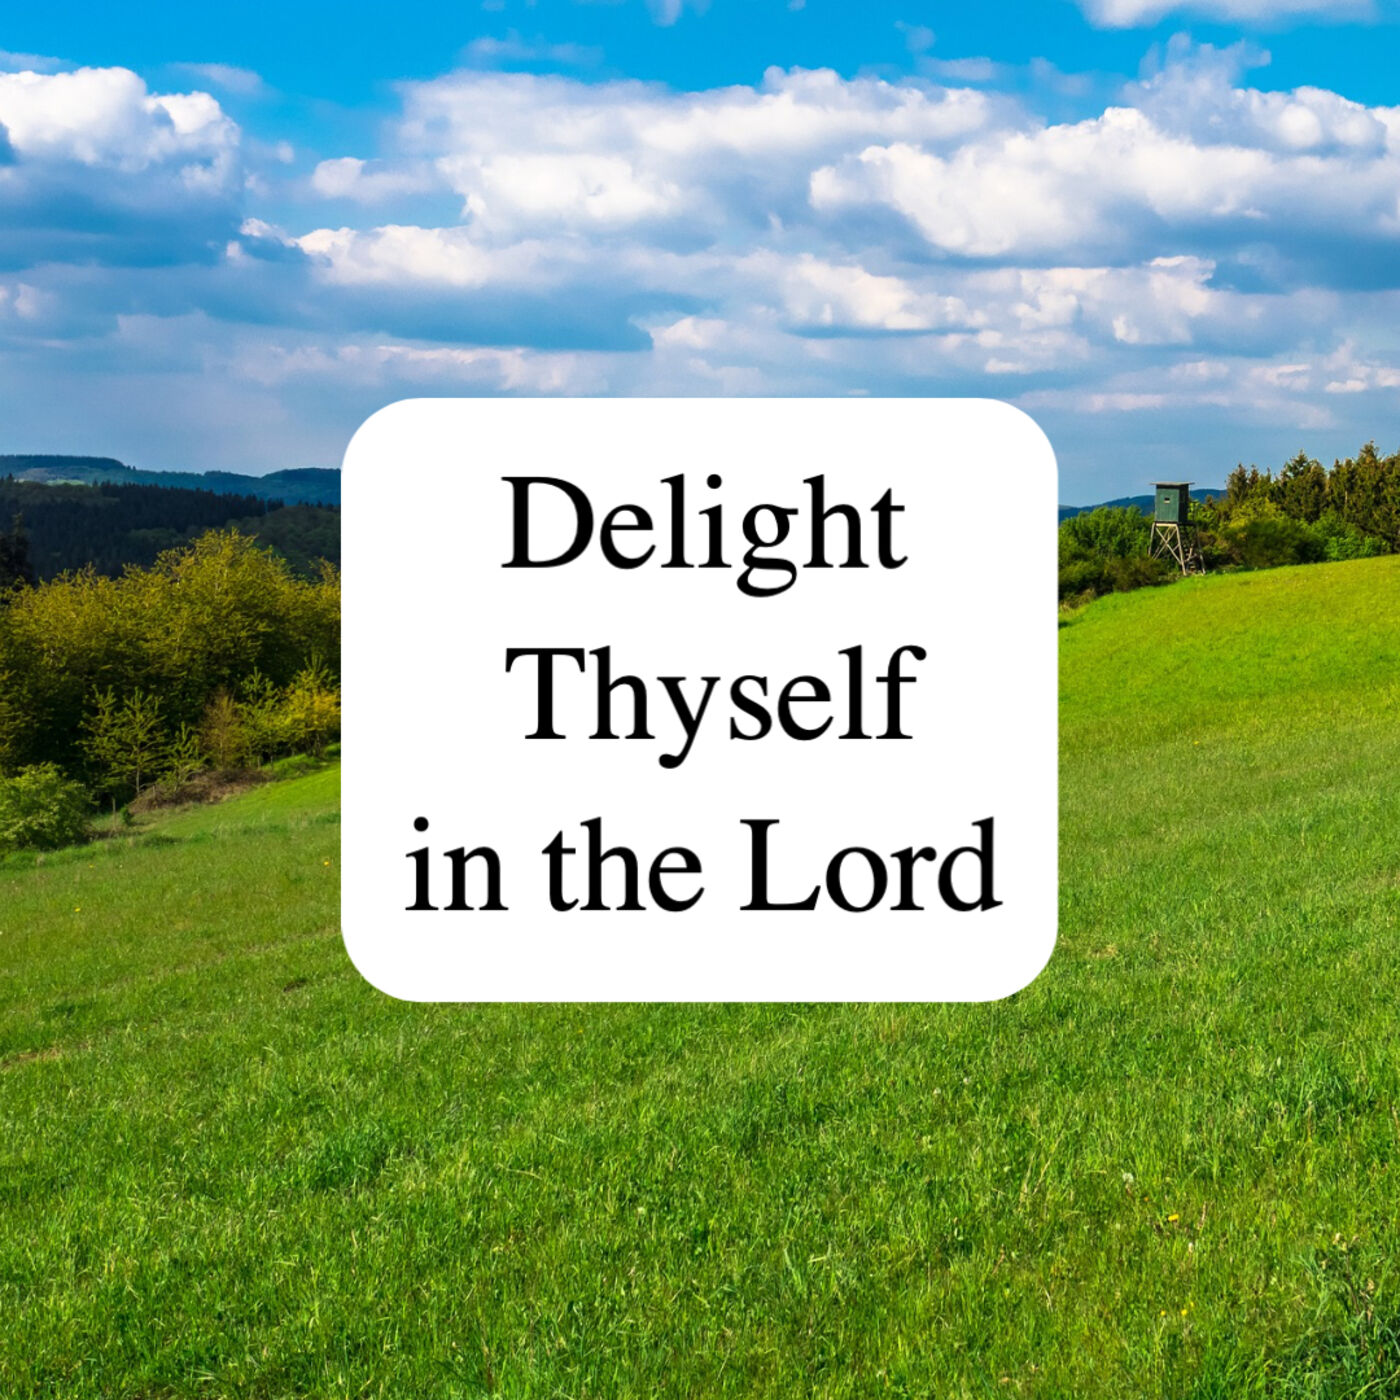 Delight Thyself in the Lord